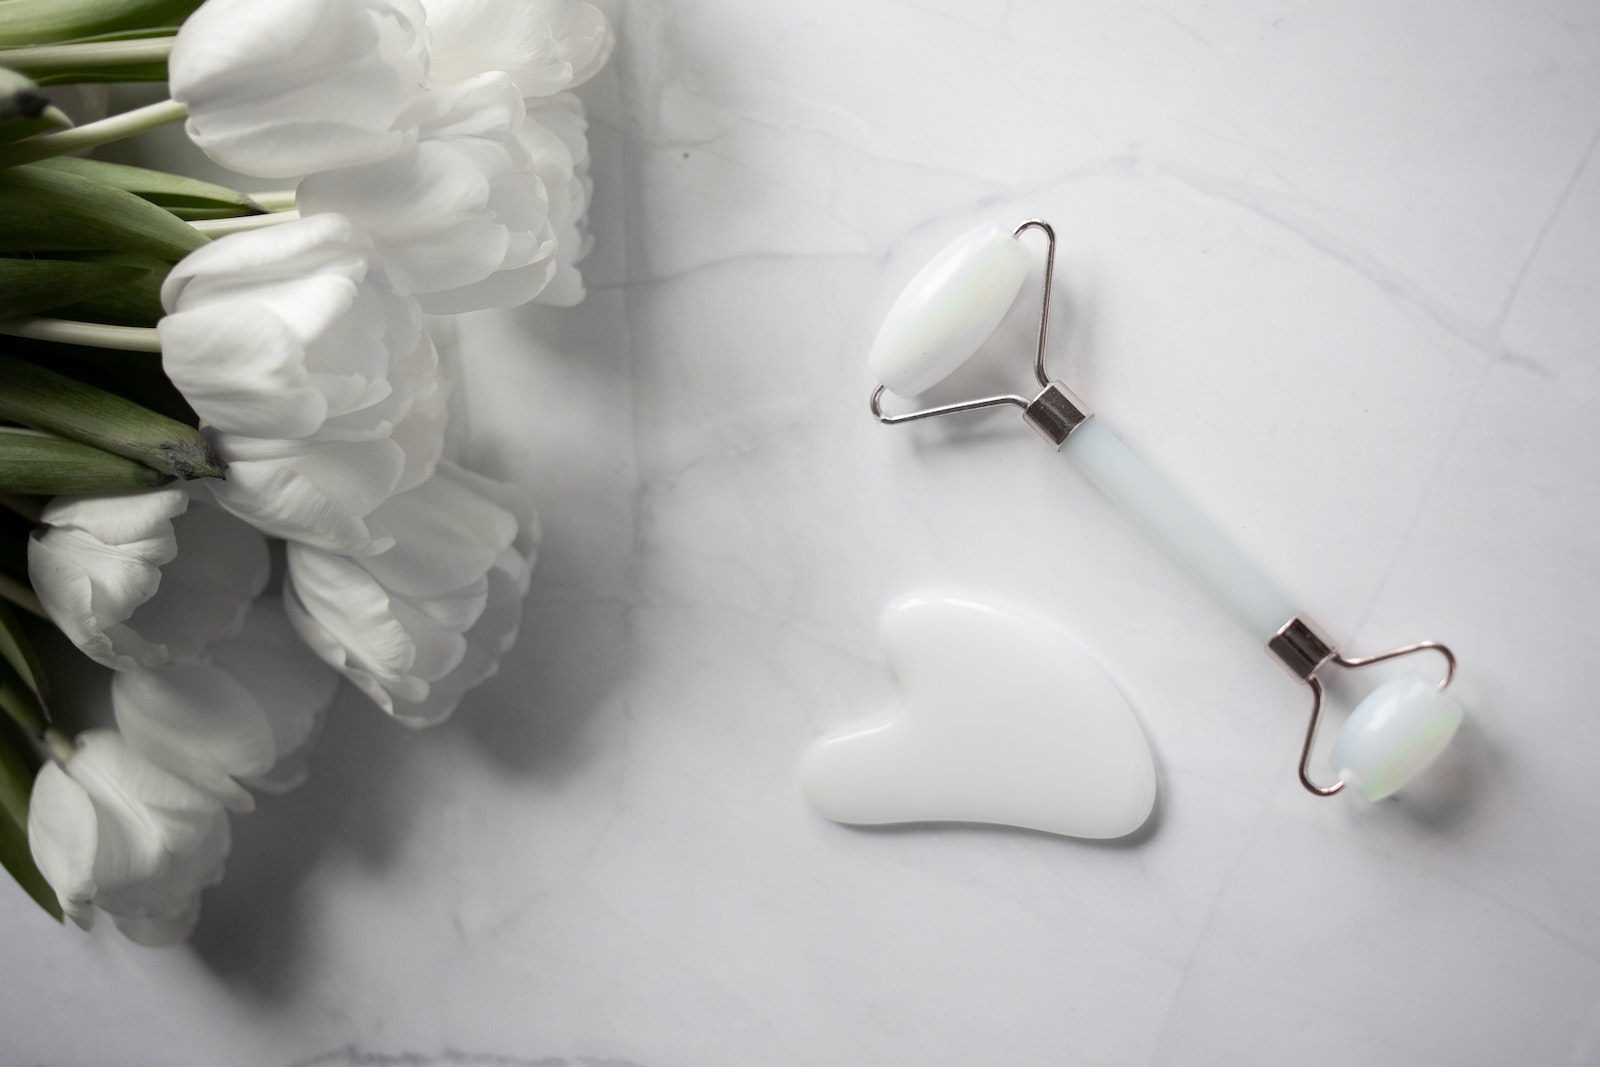 White Gua sha tools placed near bouquet of flowers on marble table